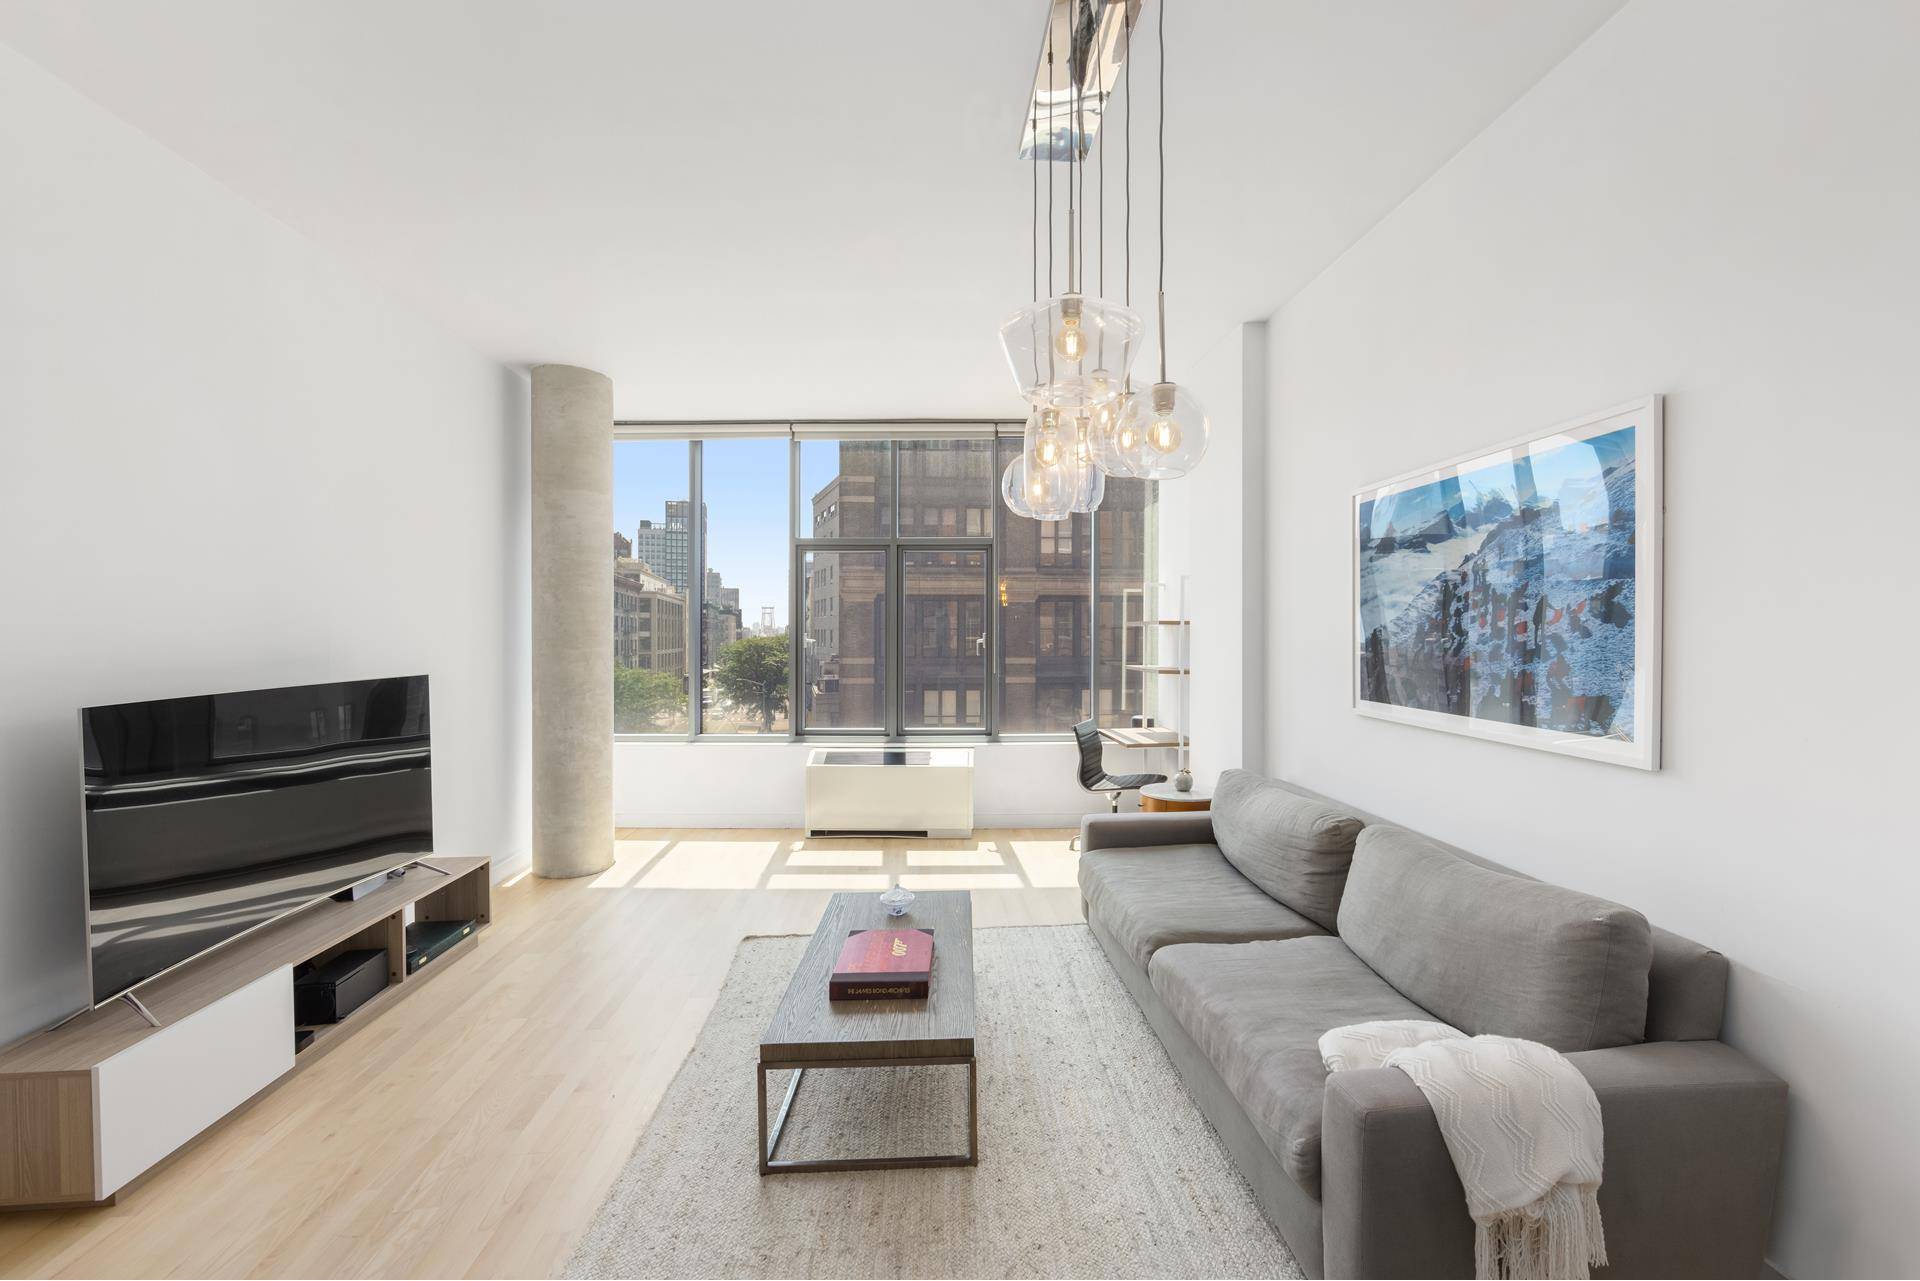 Introducing 210 Lafayette Street, 4D this incredibly bright, mint condition 2 bed 2 bath enjoys exceptional views over downtown NYC, Petrosino Square Park and the Williamsburg Bridge.